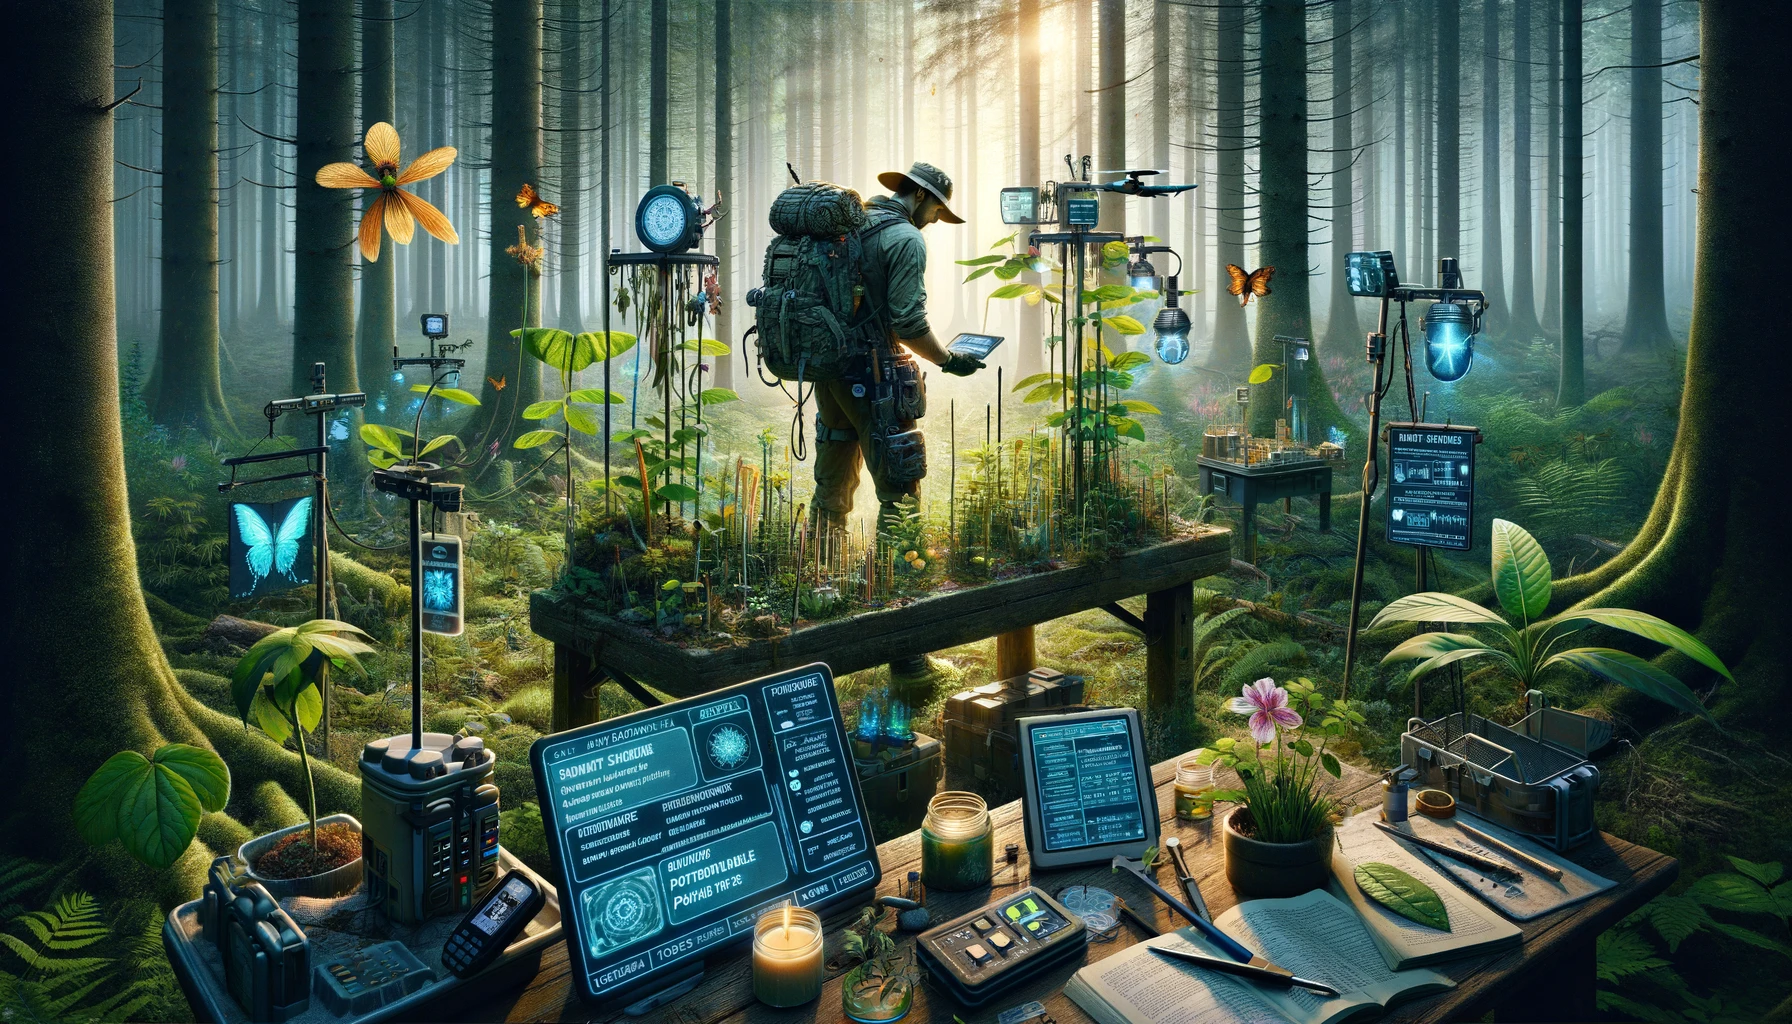 Dynamic foraging scene in a dense forest with a prepper using advanced tools and tech for plant identification, including a high-tech wearable device and solar-powered interactive signs, alongside a portable lab for testing edibility, highlighting innovation and safety